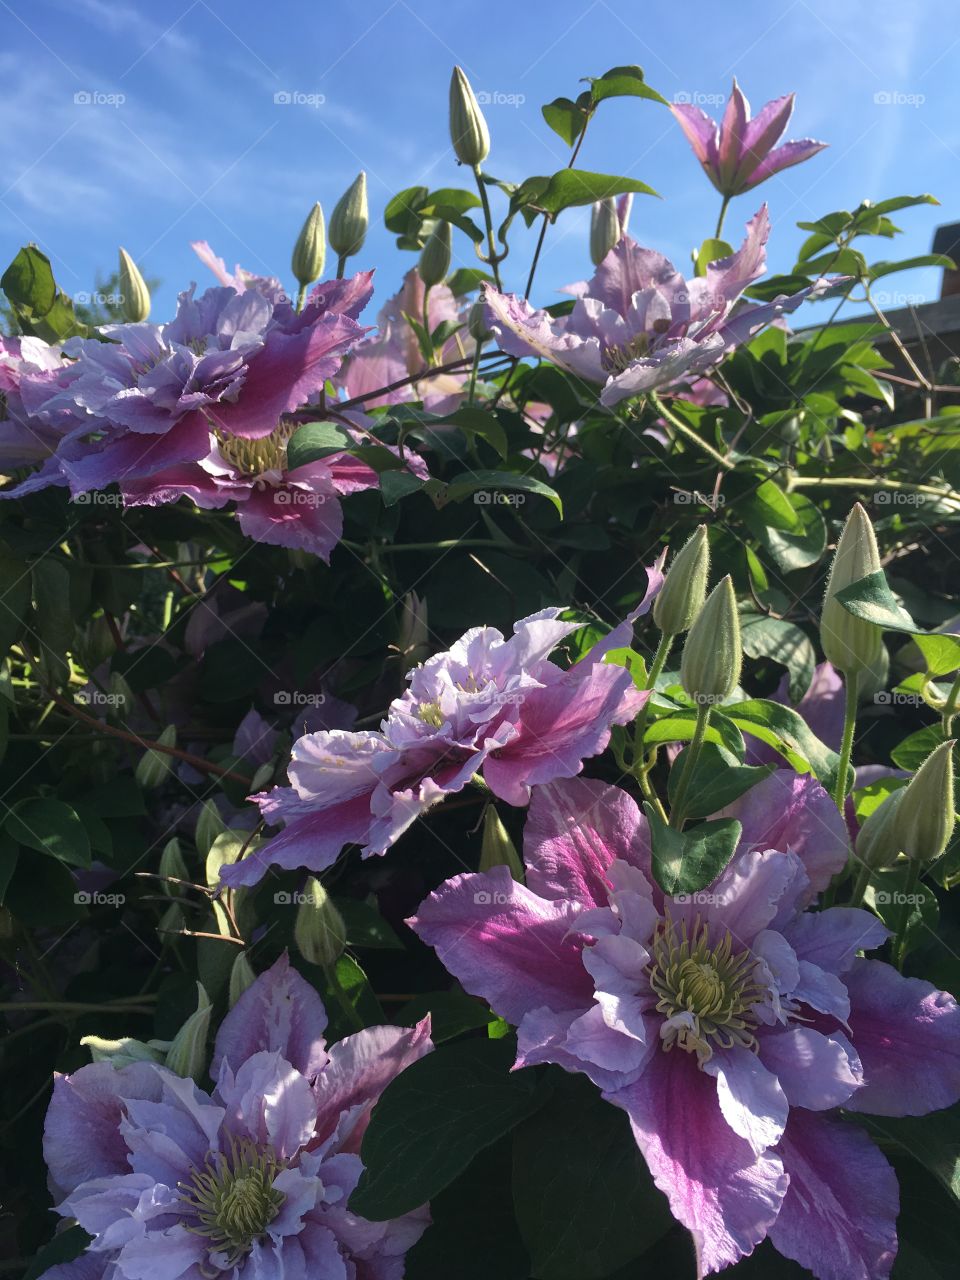 Climbing Clematis plant with single and double flowers in a garden in summer 